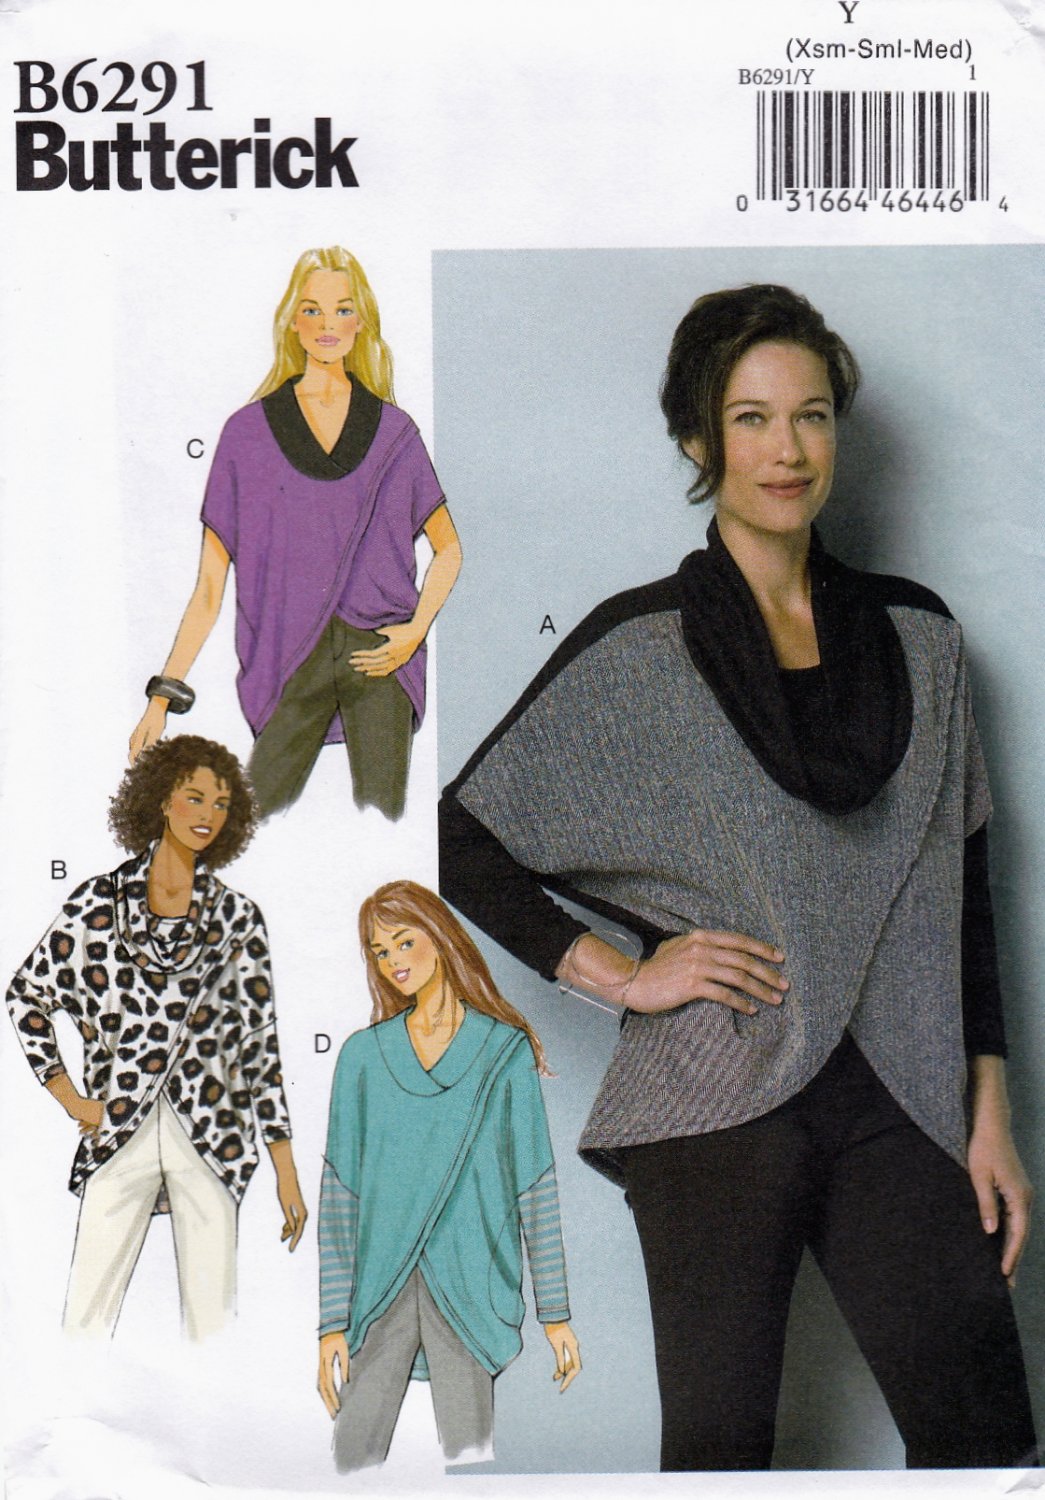 Butterick B6291 Misses Wraps Pullover Loose Fitting Sewing Pattern Sizes Xsm-Sml-Med